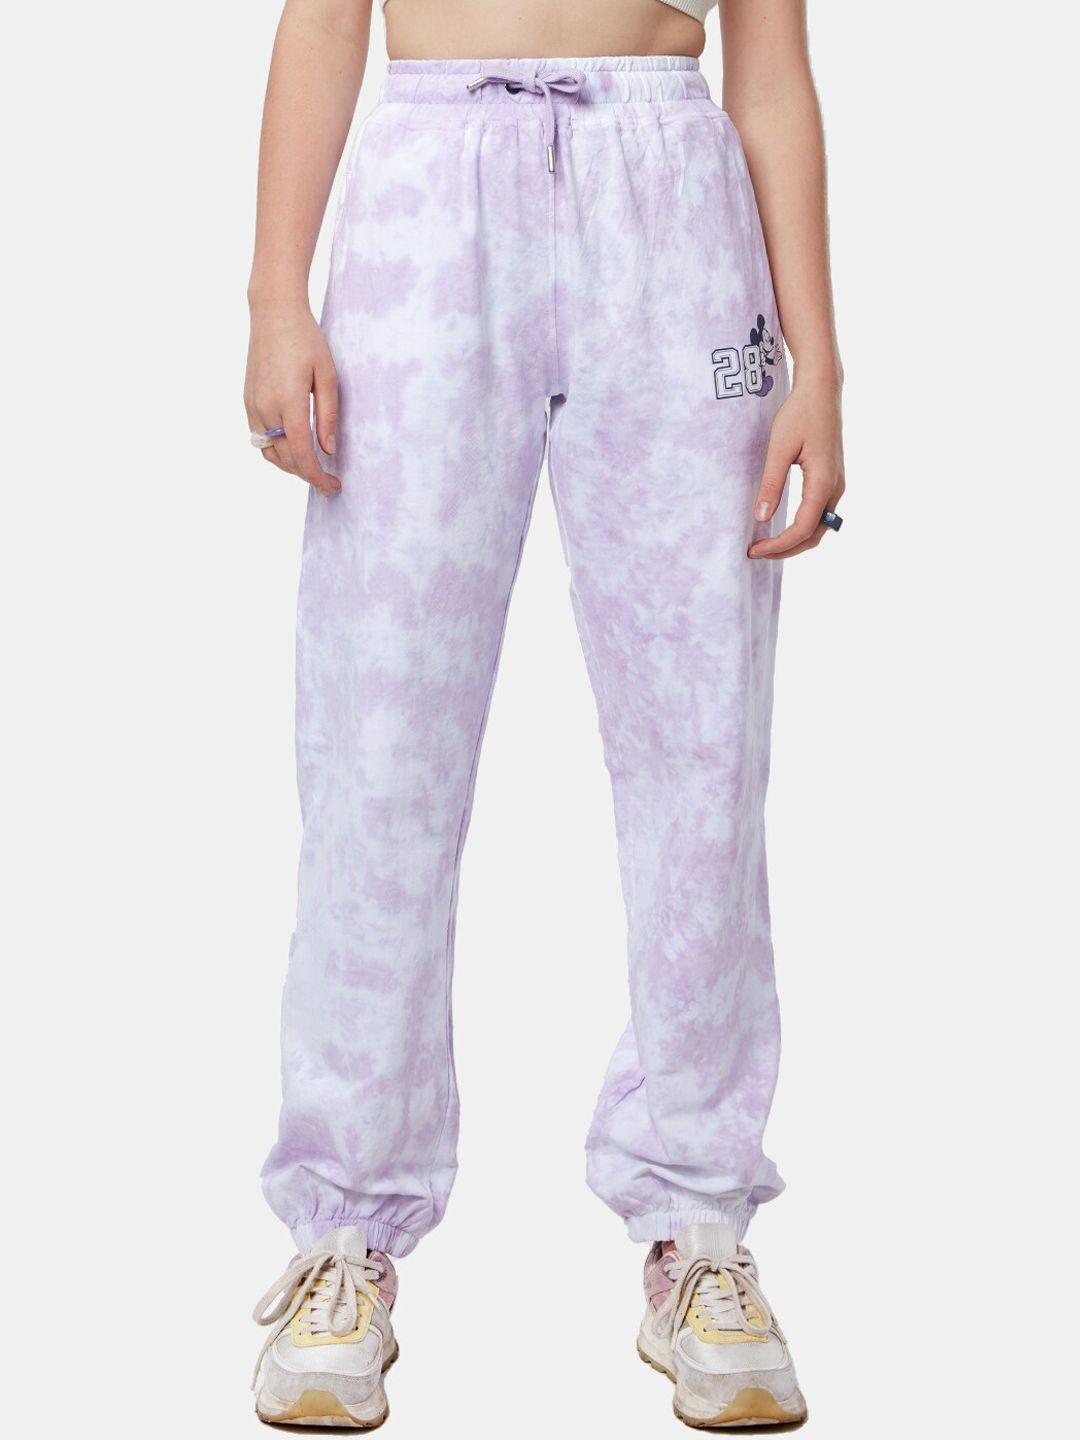 the souled store women dyed mickey mouse printed joggers